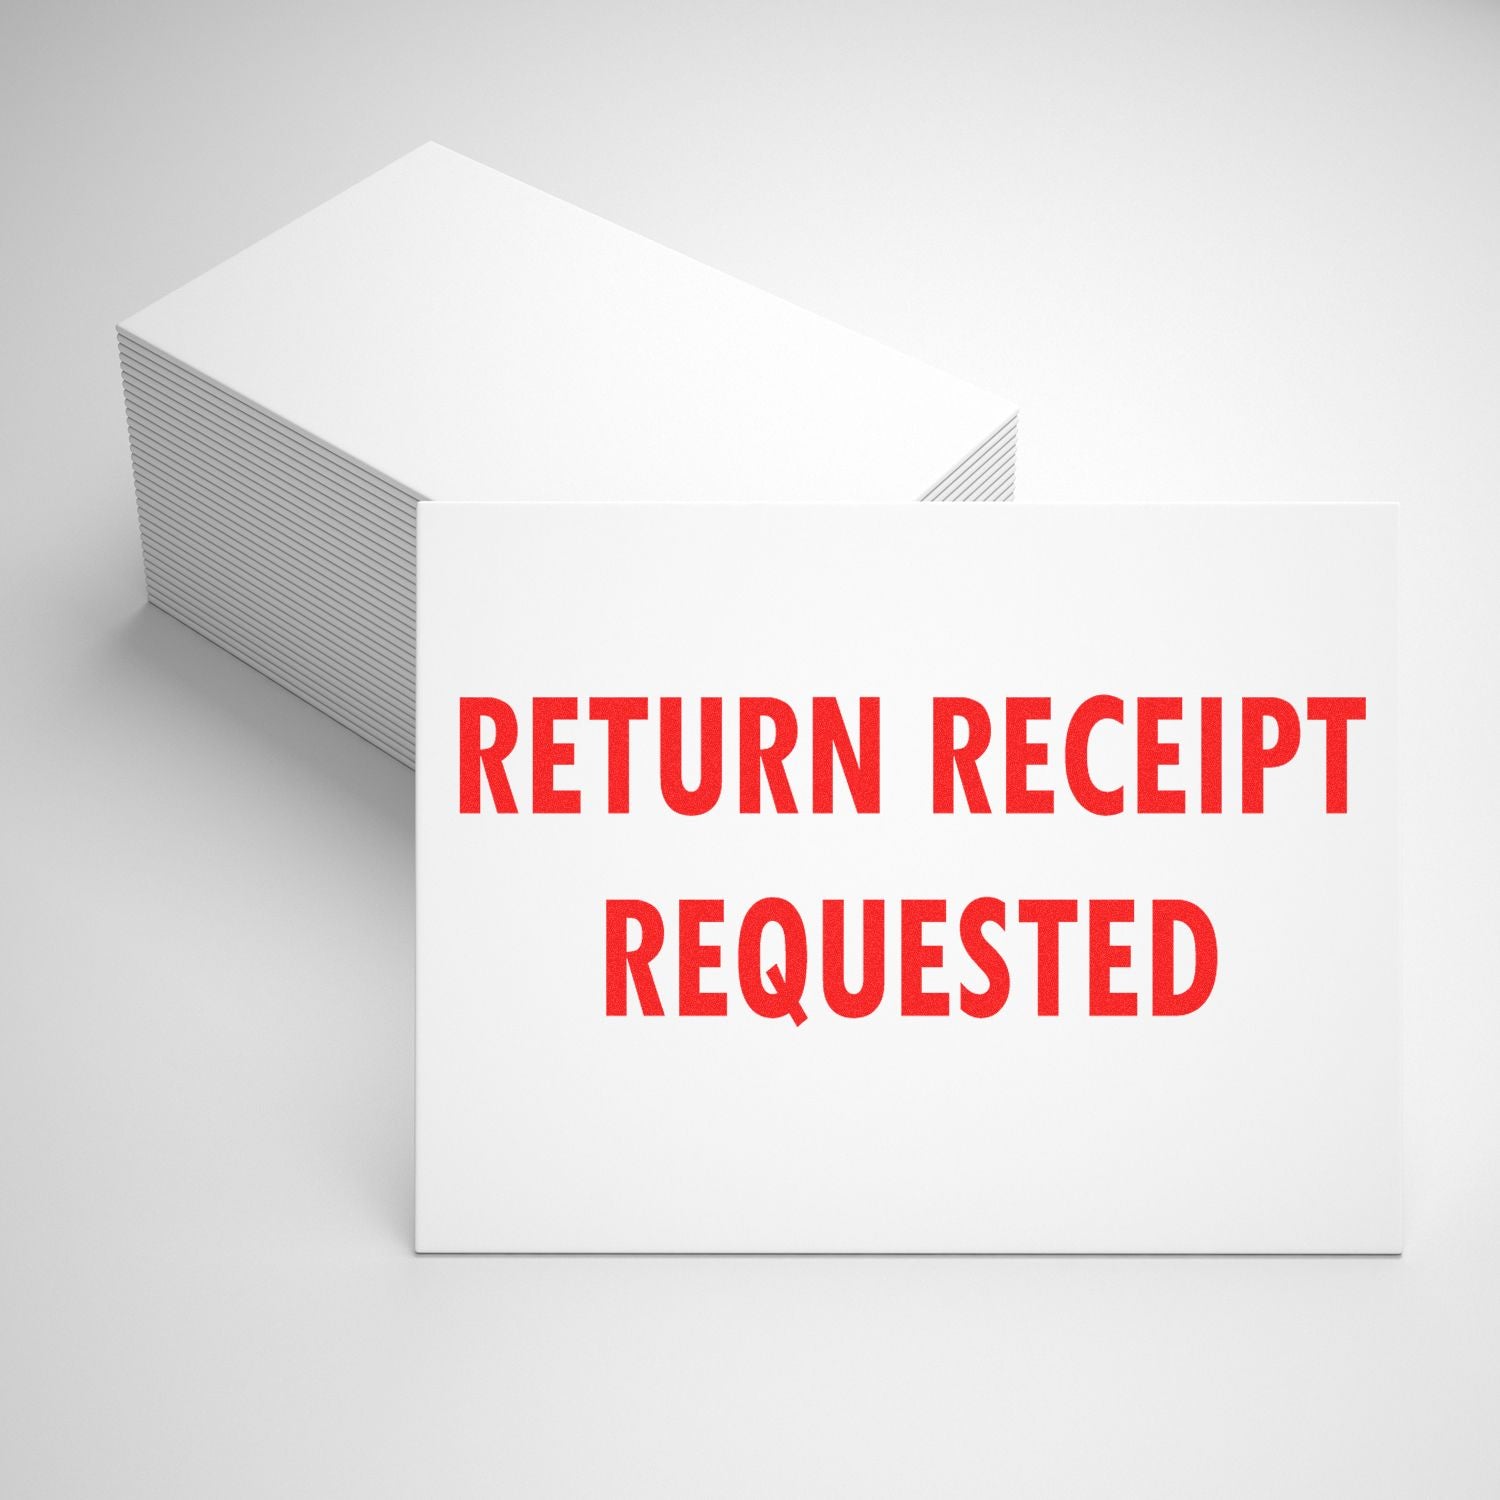 Large Self Inking Return Receipt Requested Stamp In Use Photo